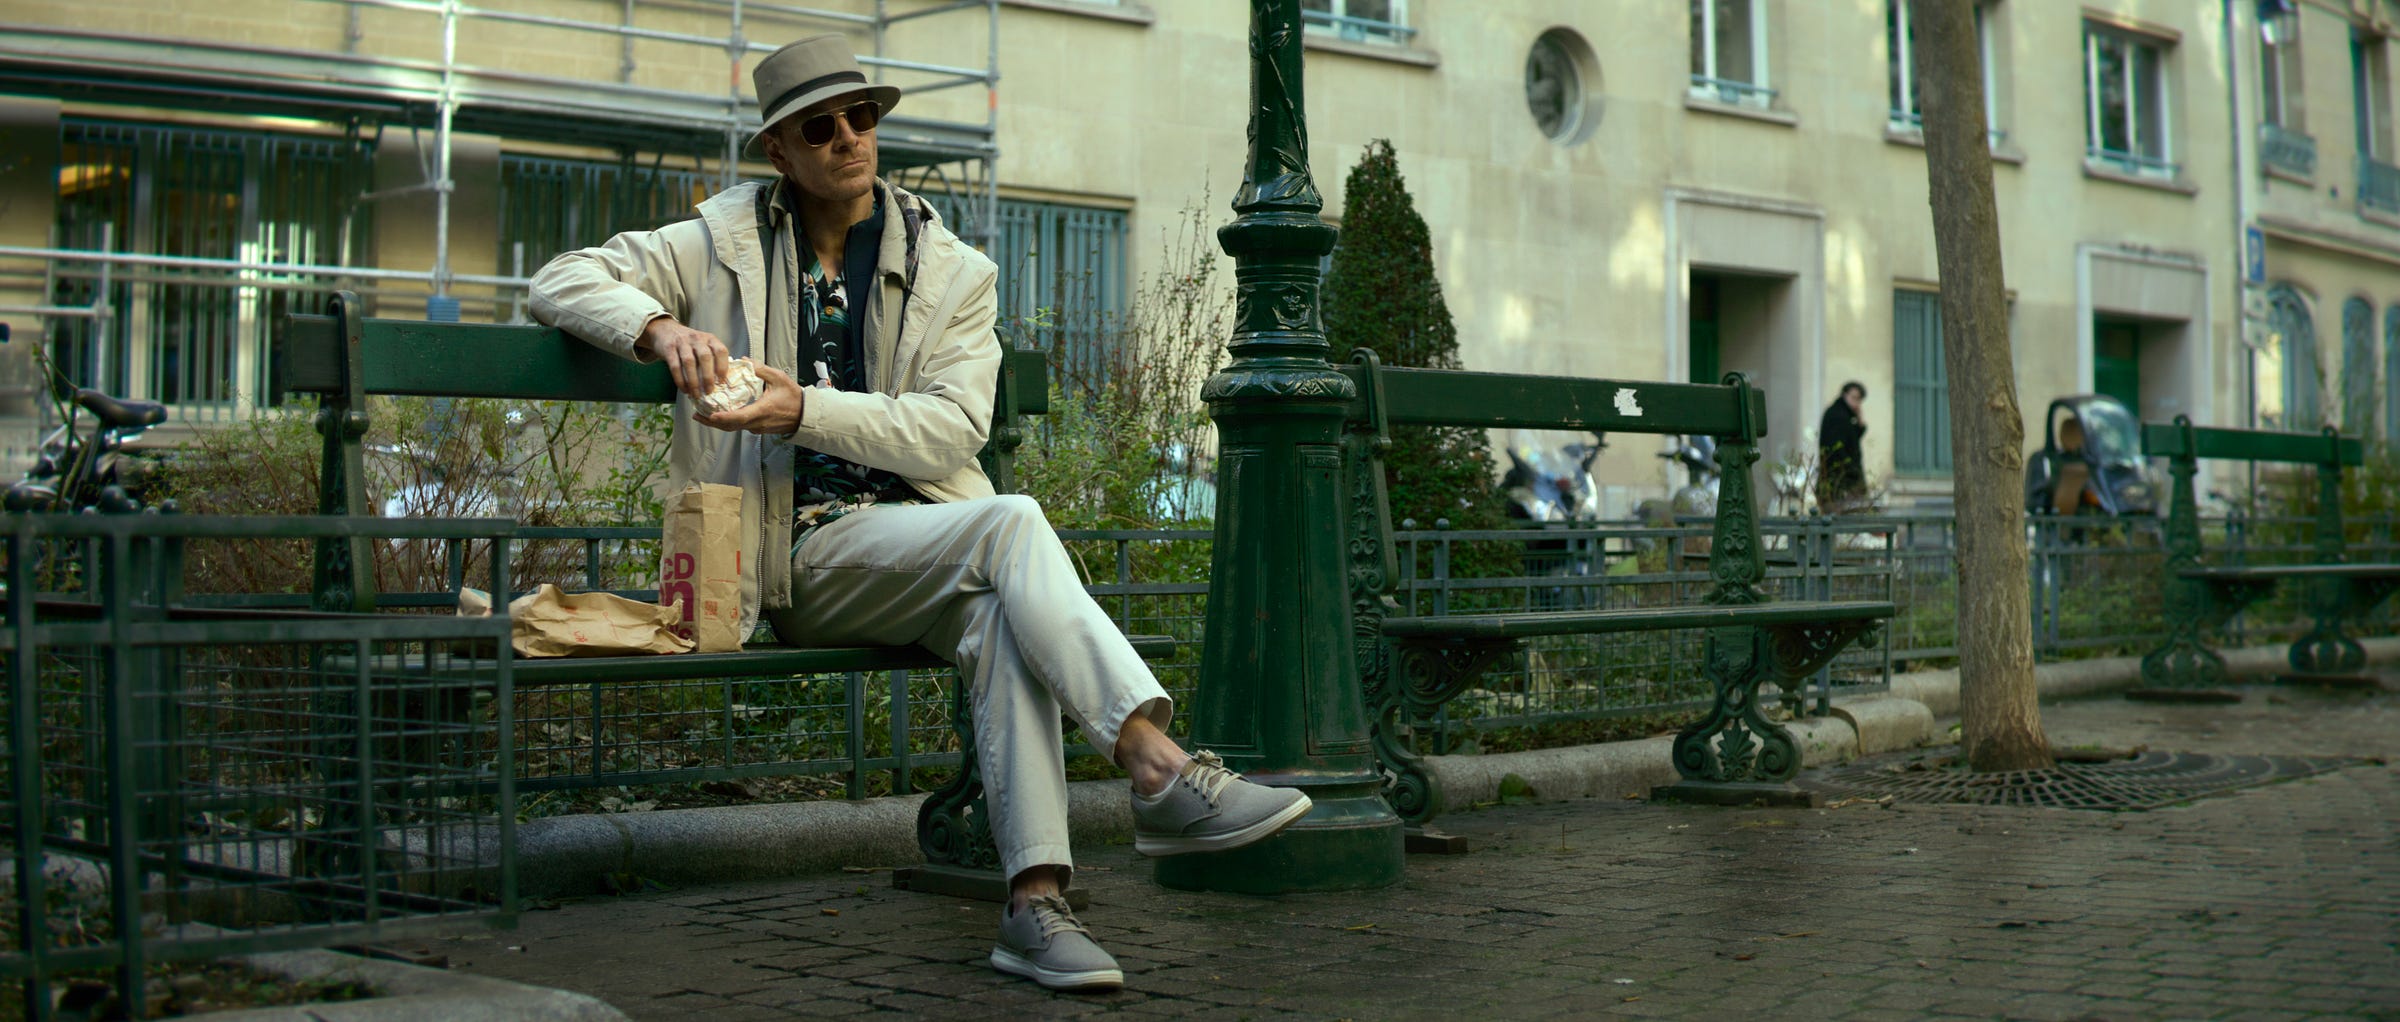 Michael Fassbender as The Killer sitting on a bench unwrapping a McDonald's sandwich